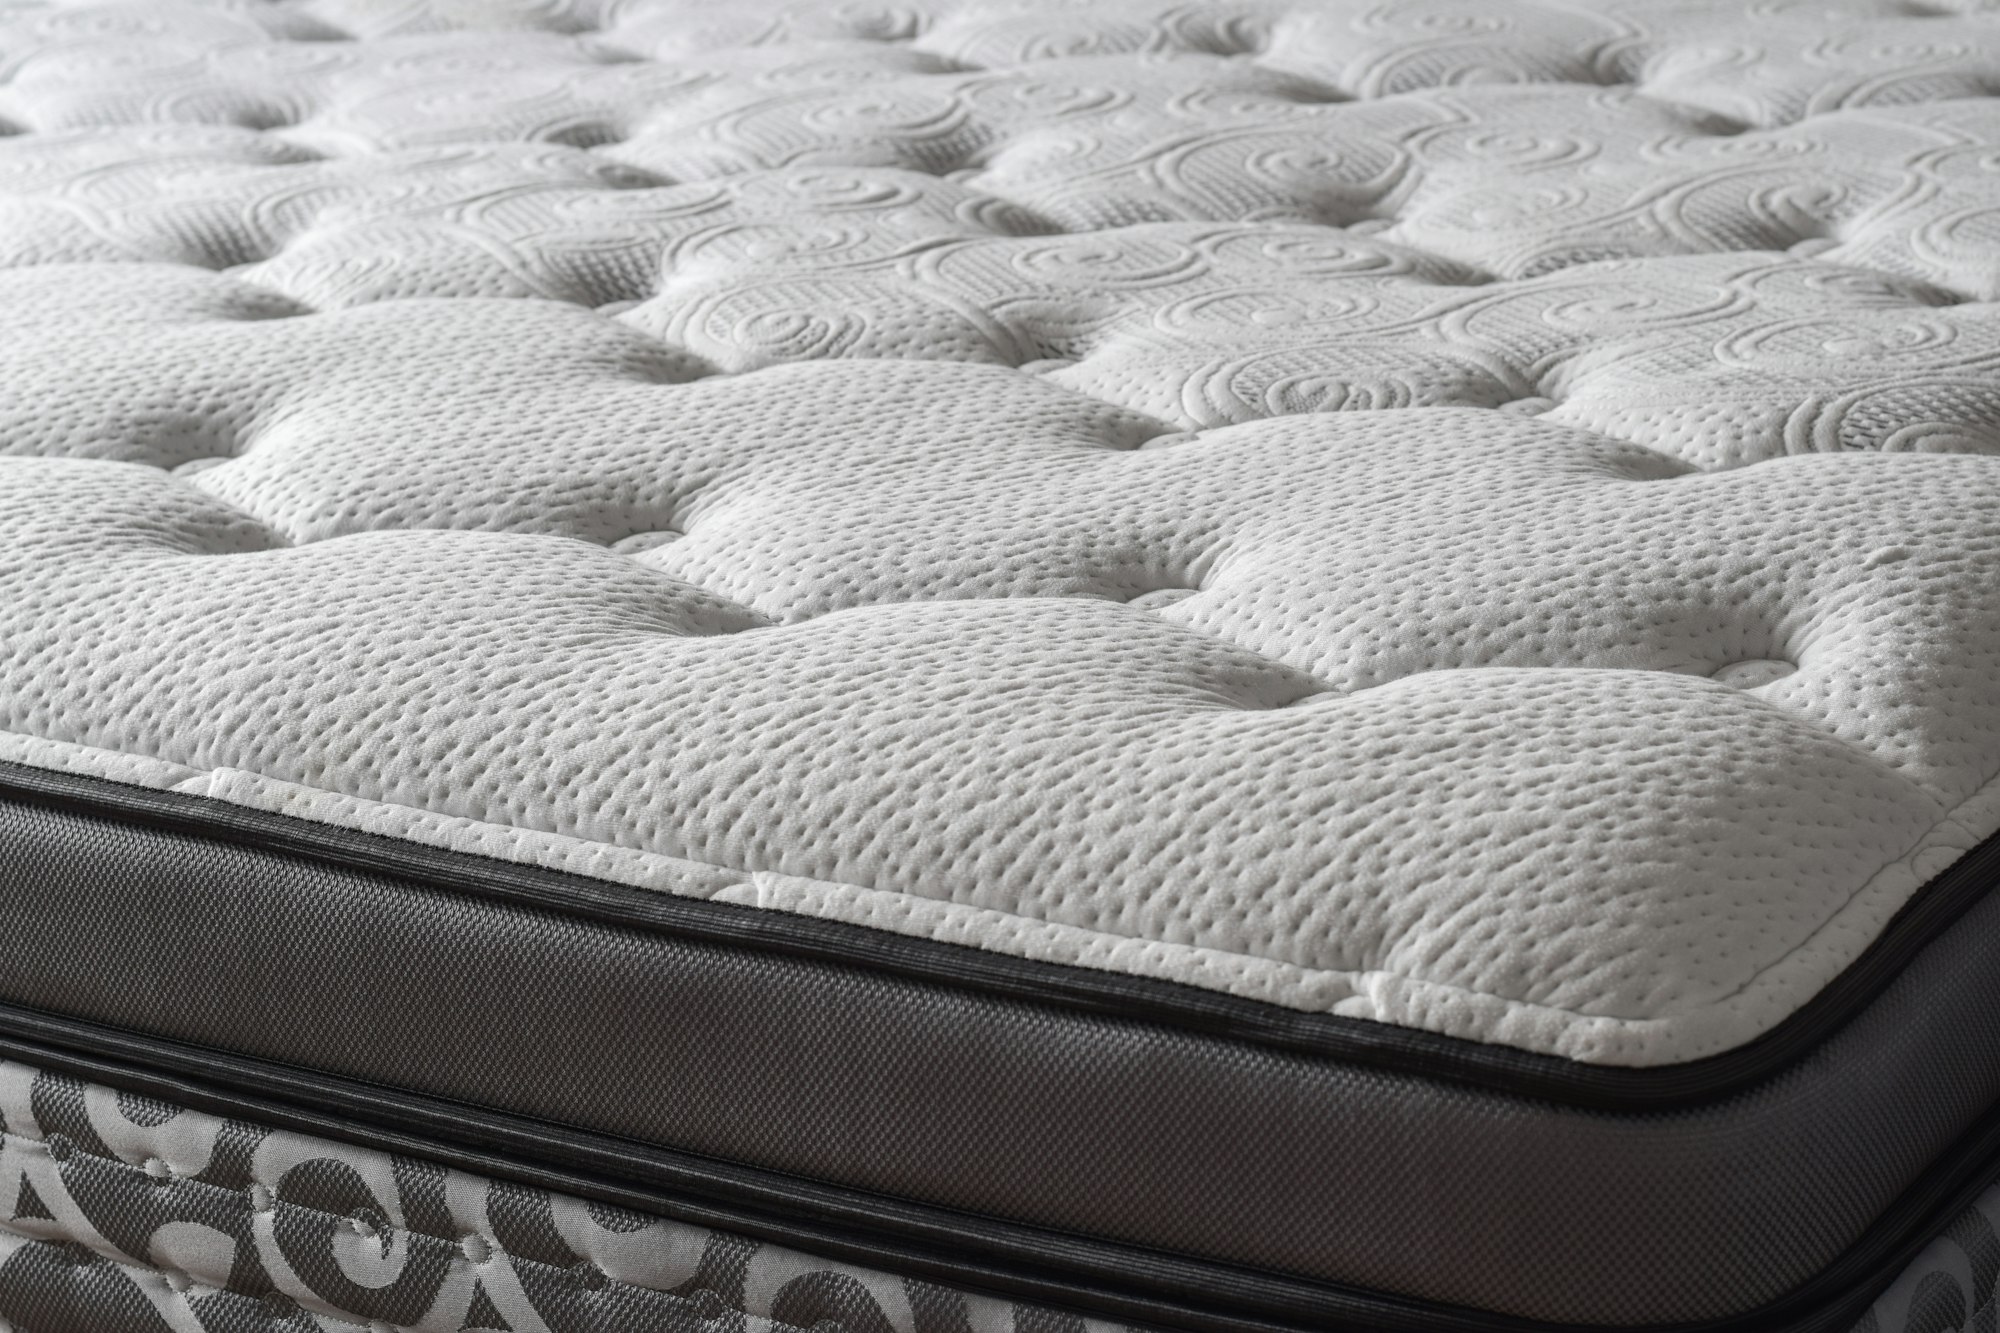 Part of a new white quilted soft mattress